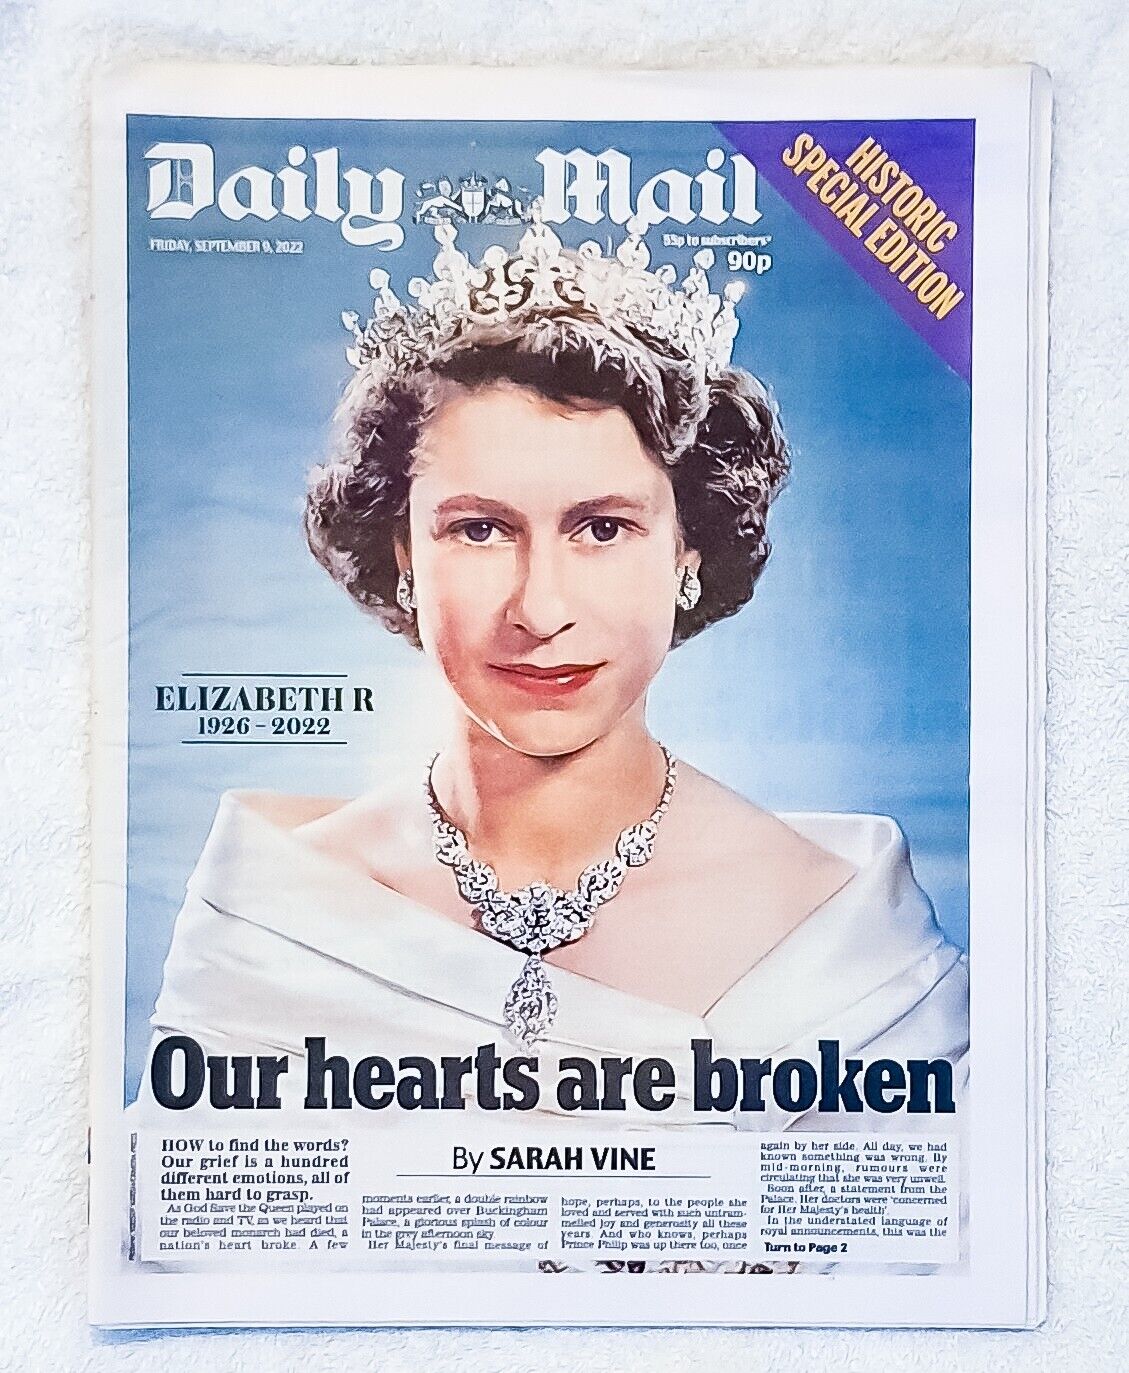 Queen Elizabeth II 1926-2022 - Daily Mail Friday 9th September 2022 Historic SE